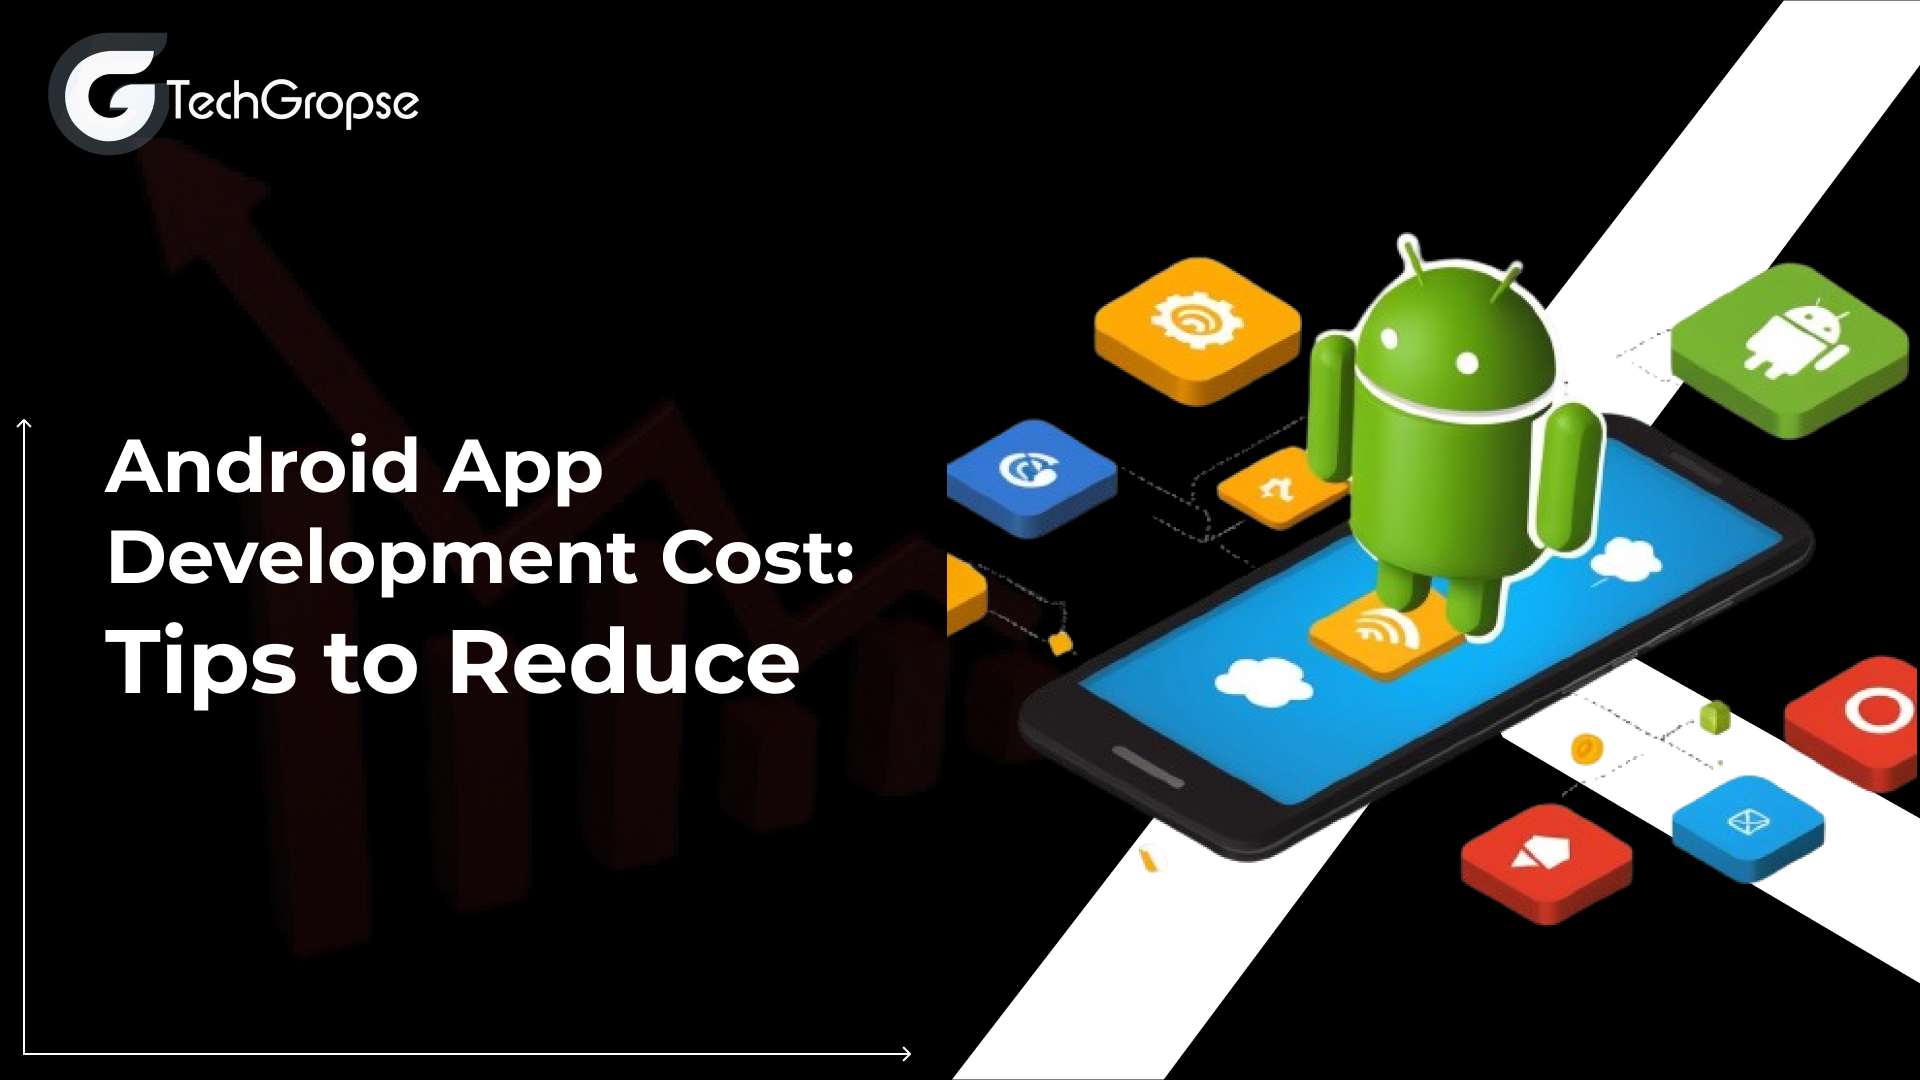 Android App Development Cost: Tips to Reduce